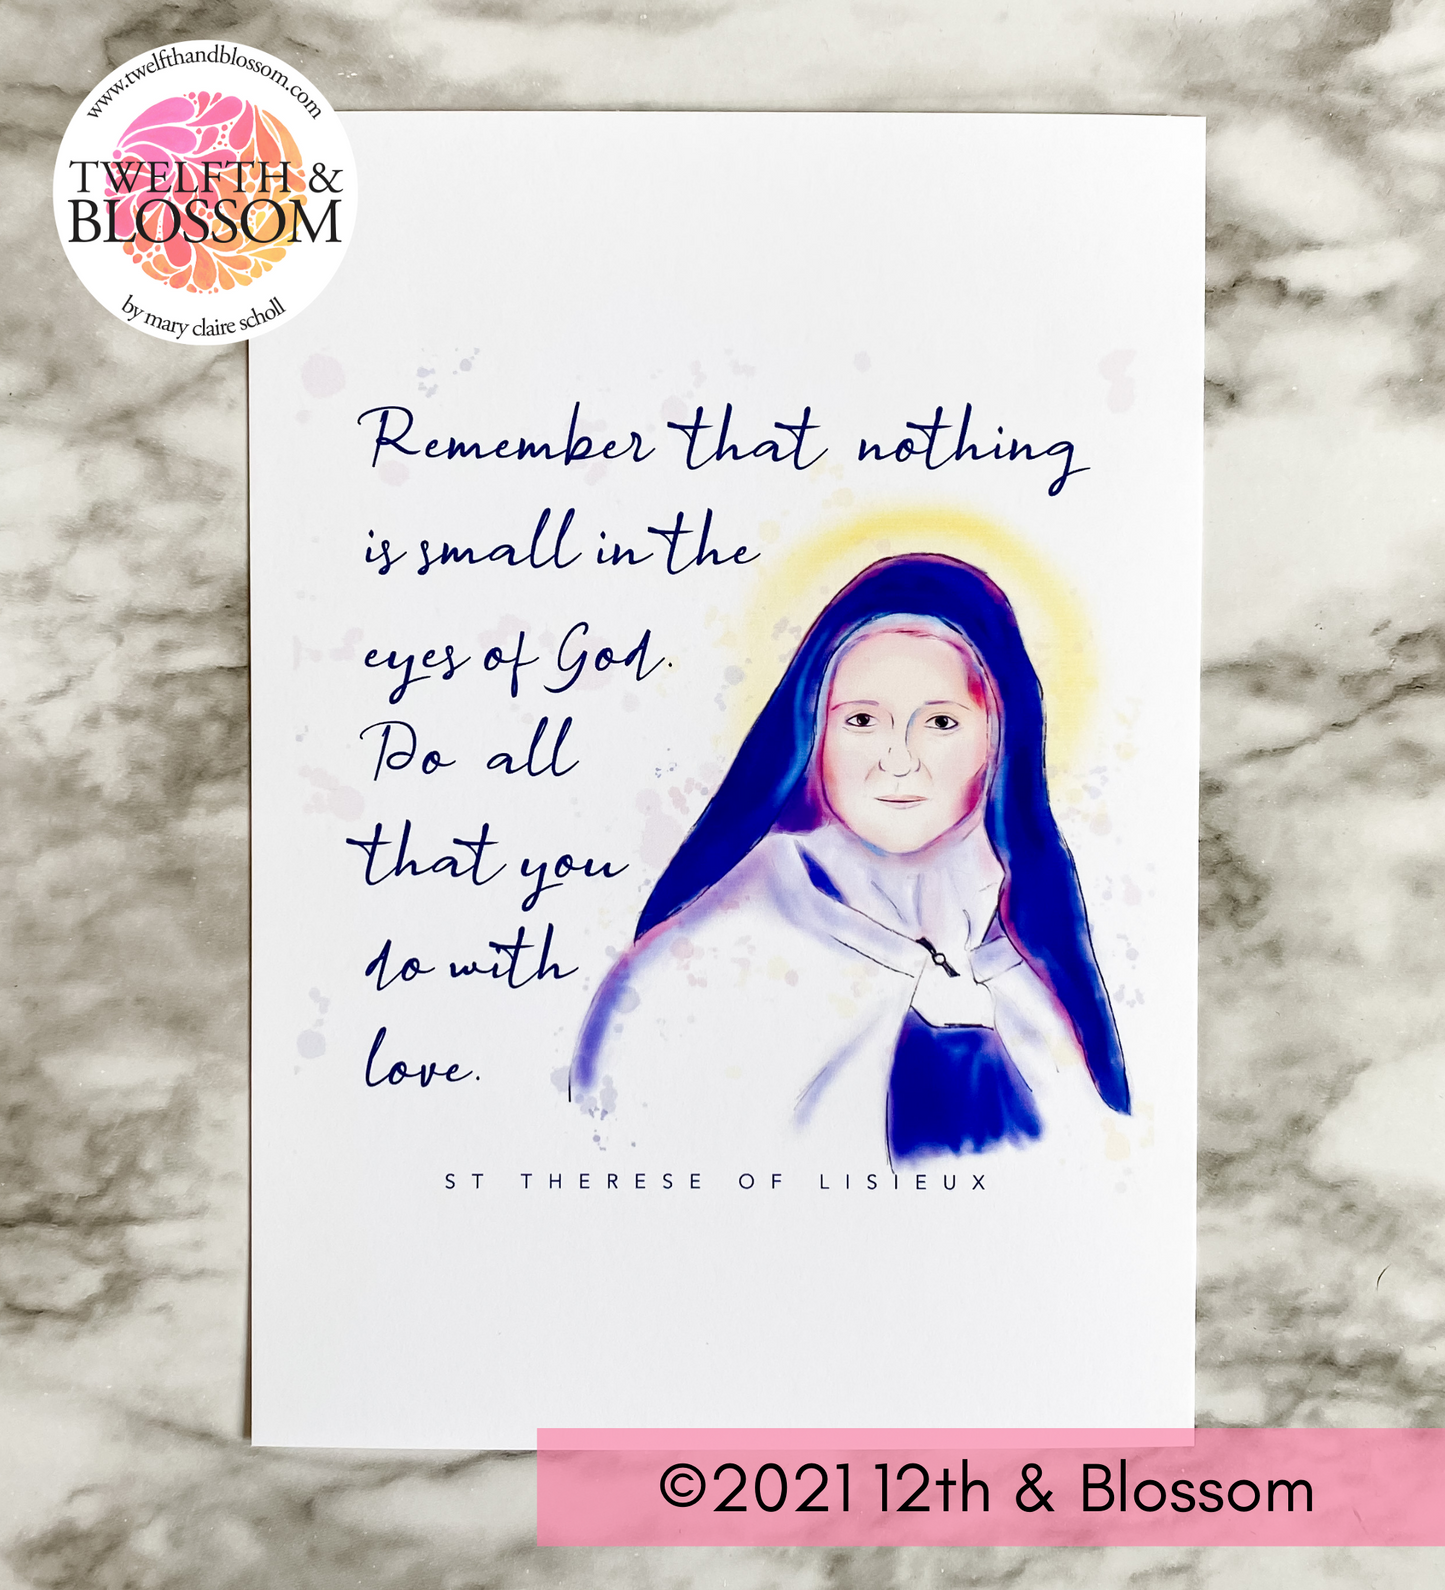 St Therese of Lisieux Art Print